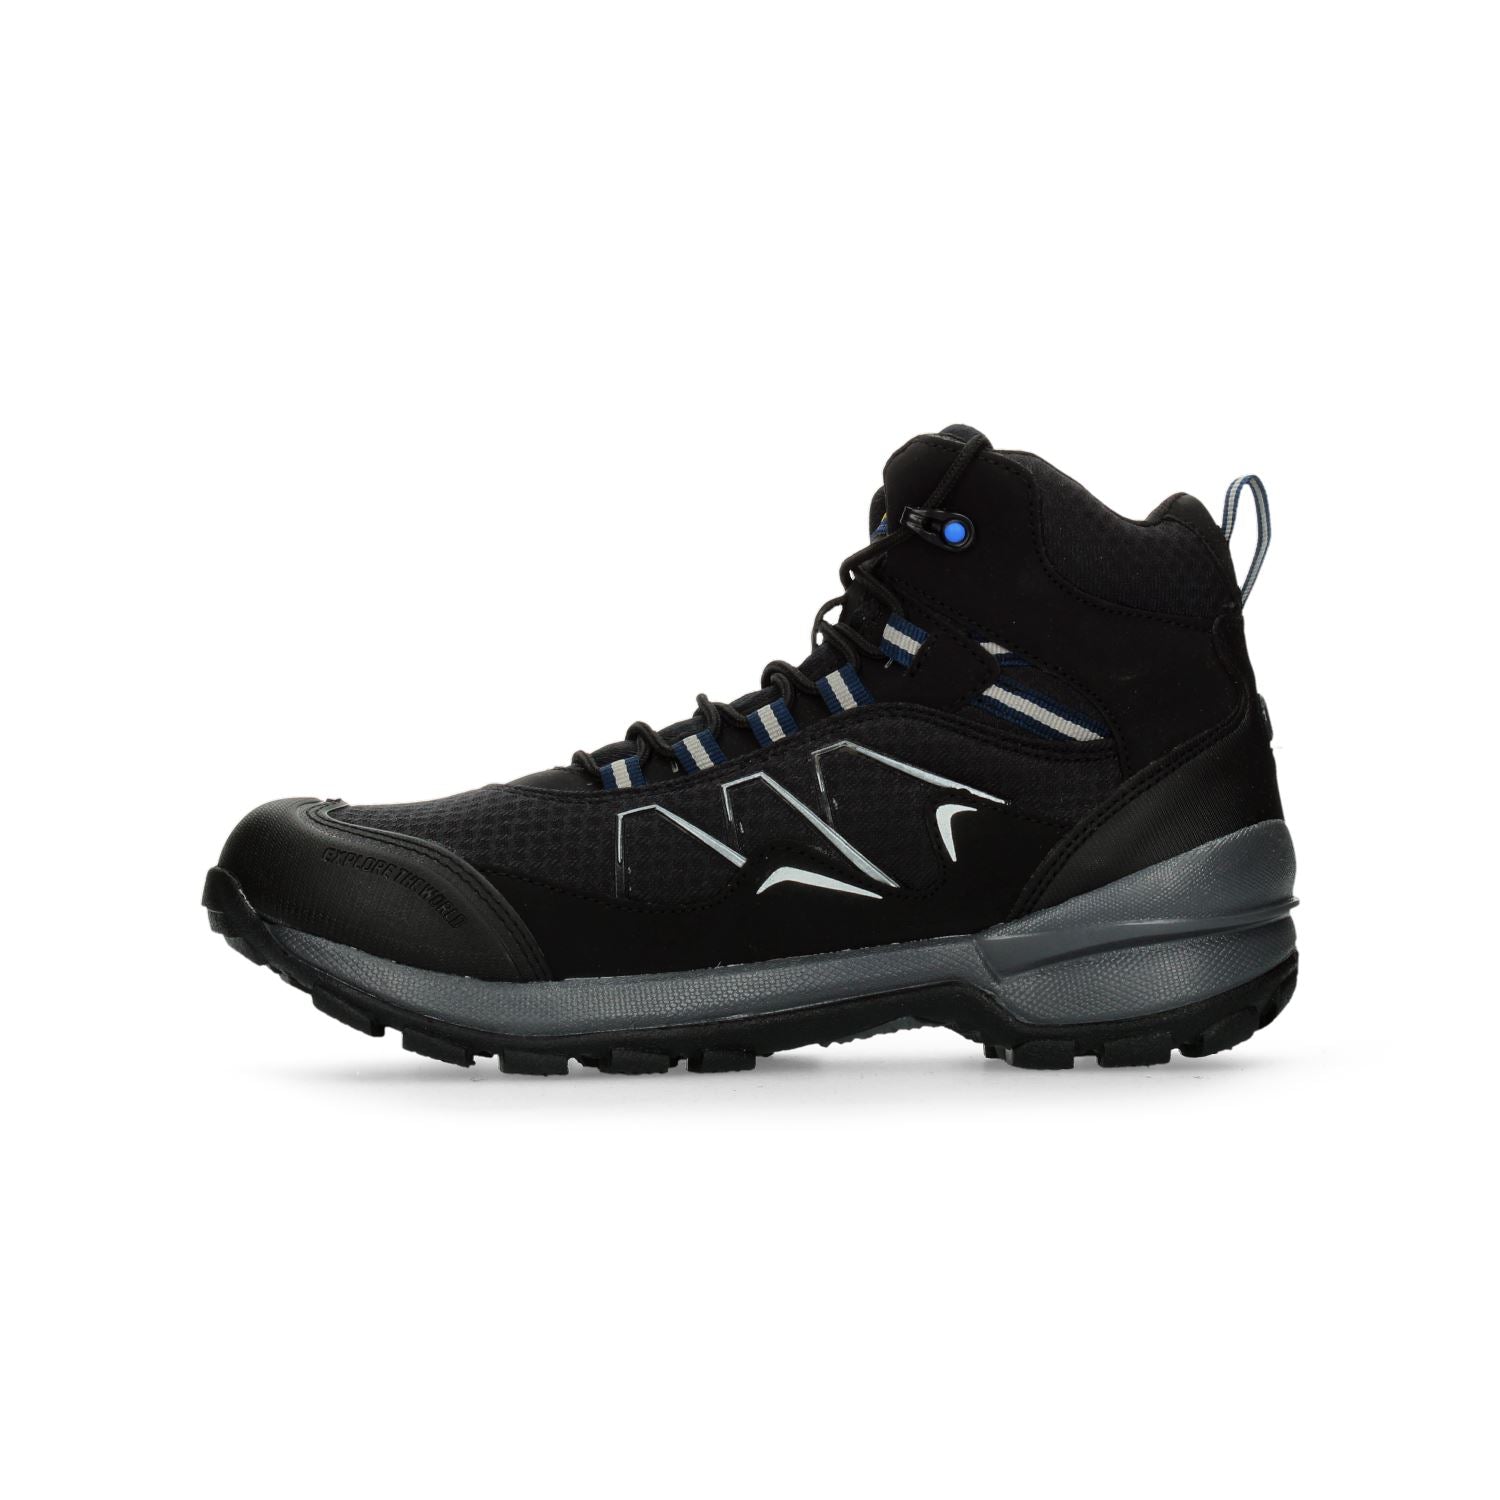 Bota Discovery Industrial Negro para Hombre [DIS18] DISCOVERY 